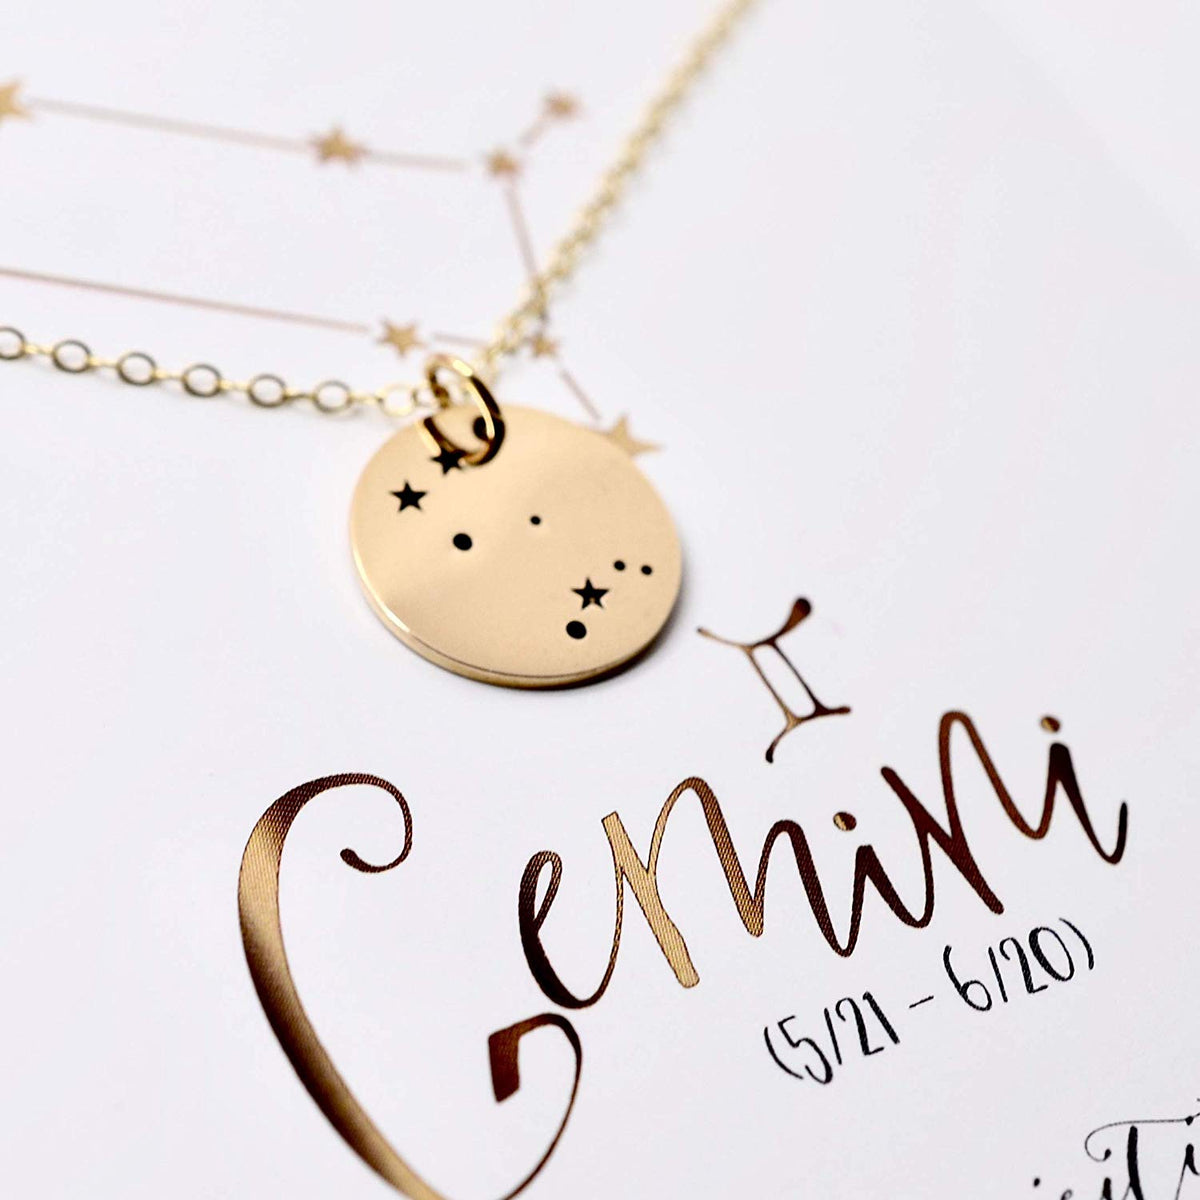 Gemini Zodiac Sign 14K Gold Filled Constellation Necklace - Love It Personalized